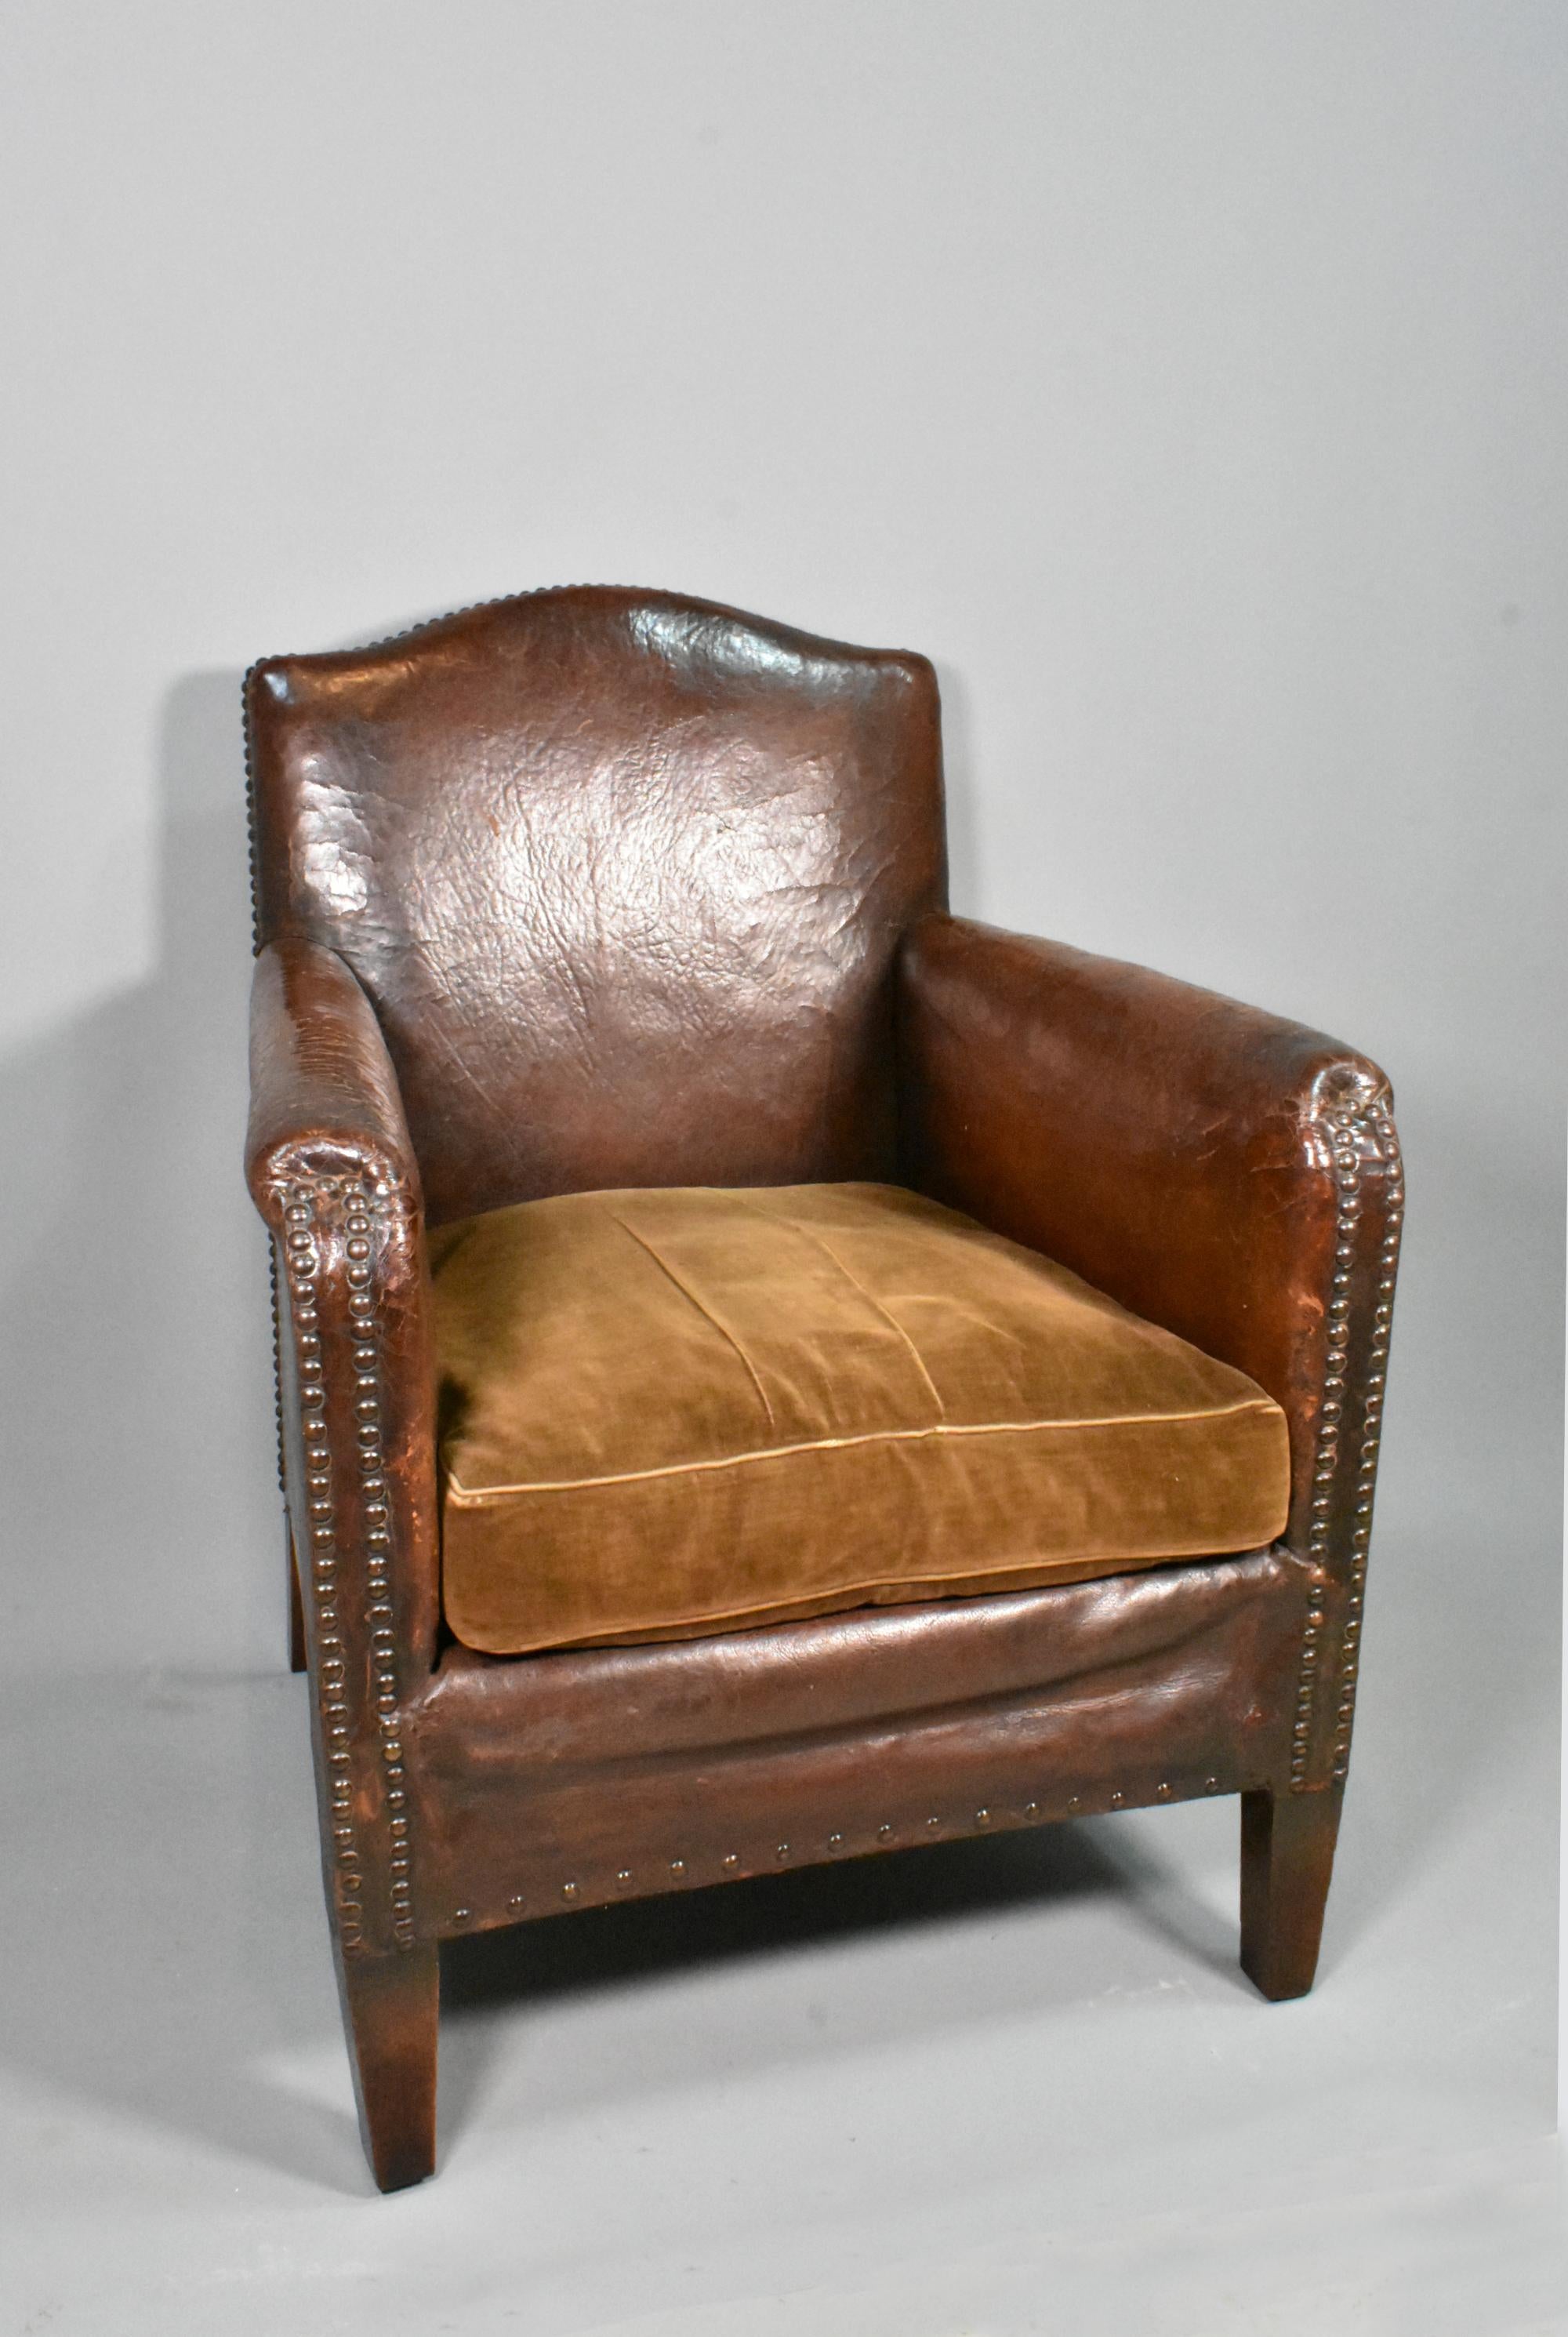 French Art Deco Leather Armchair

This lovely deep-seated Art Deco leather armchair retains its original upholstery.
 
The deeply sprung seat comes with its original fitted soft cushion in matching brown velour with piped surround.
 
The